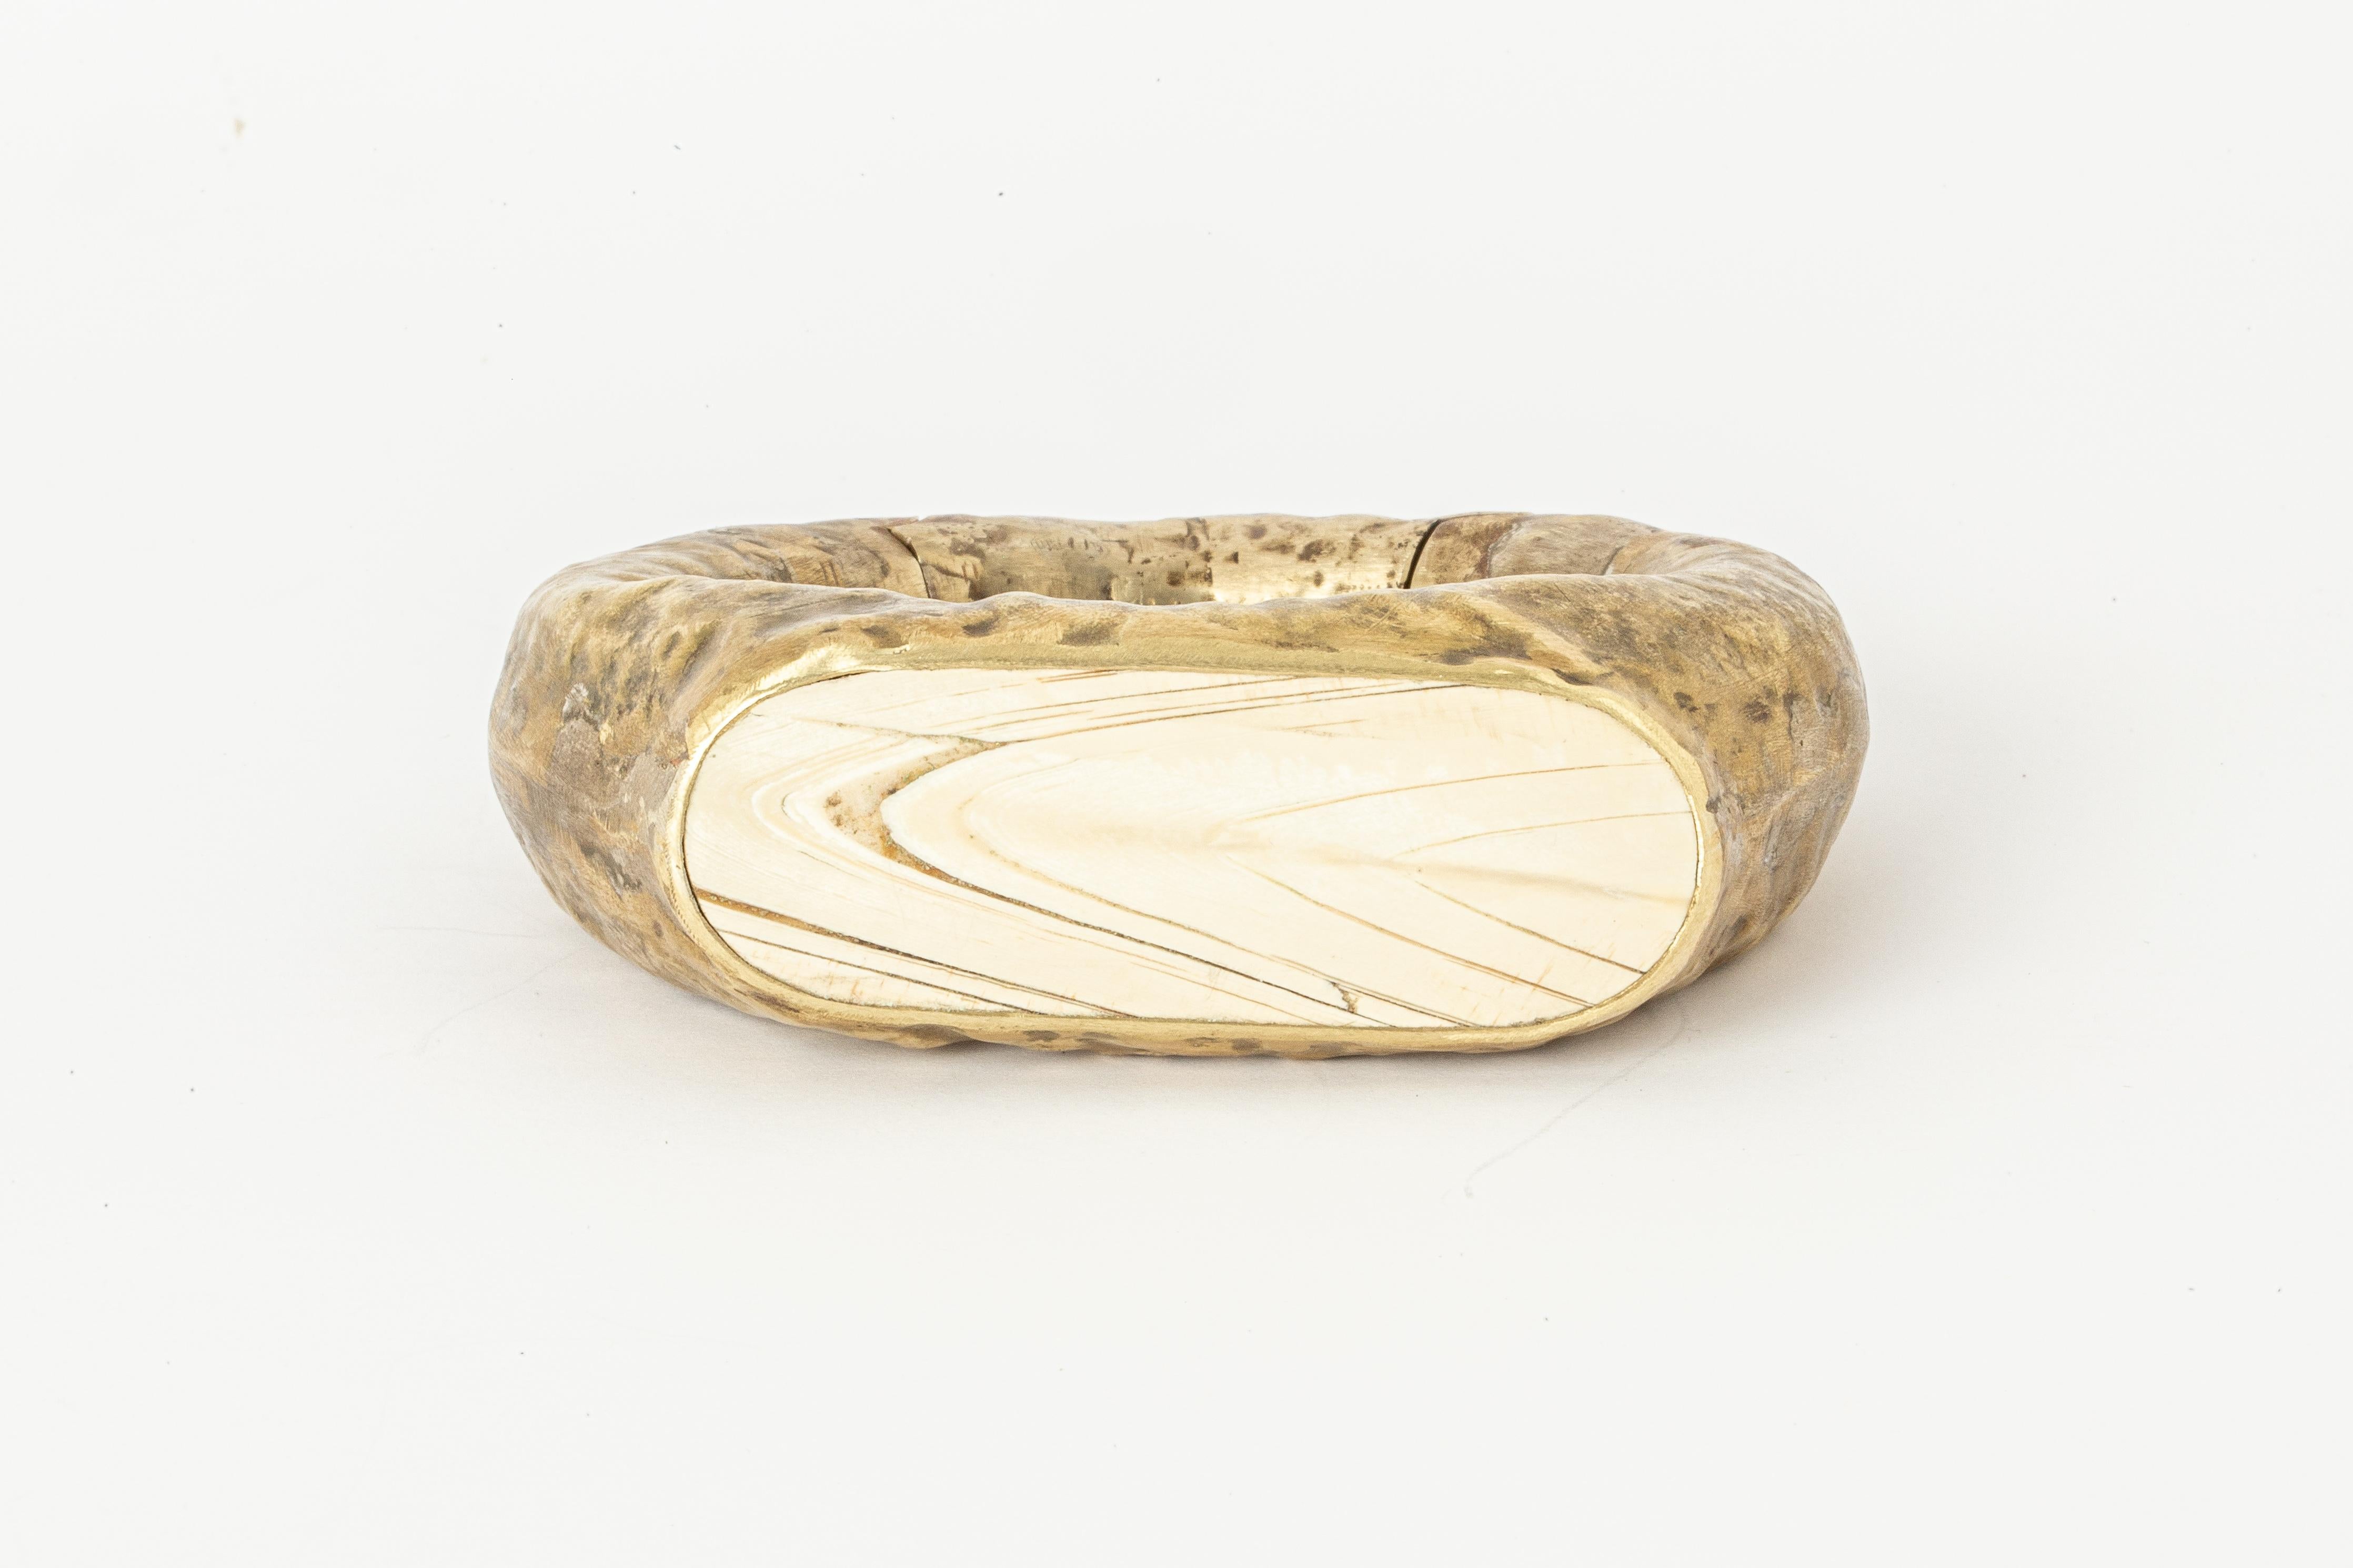 Bracelet in brass and mammoth ivory. This piece is 100% hand fabricated from metal plate; cut into sections and soldered together to make the hollow three dimensional form. This item is made with a naturally occurring element and will vary from the